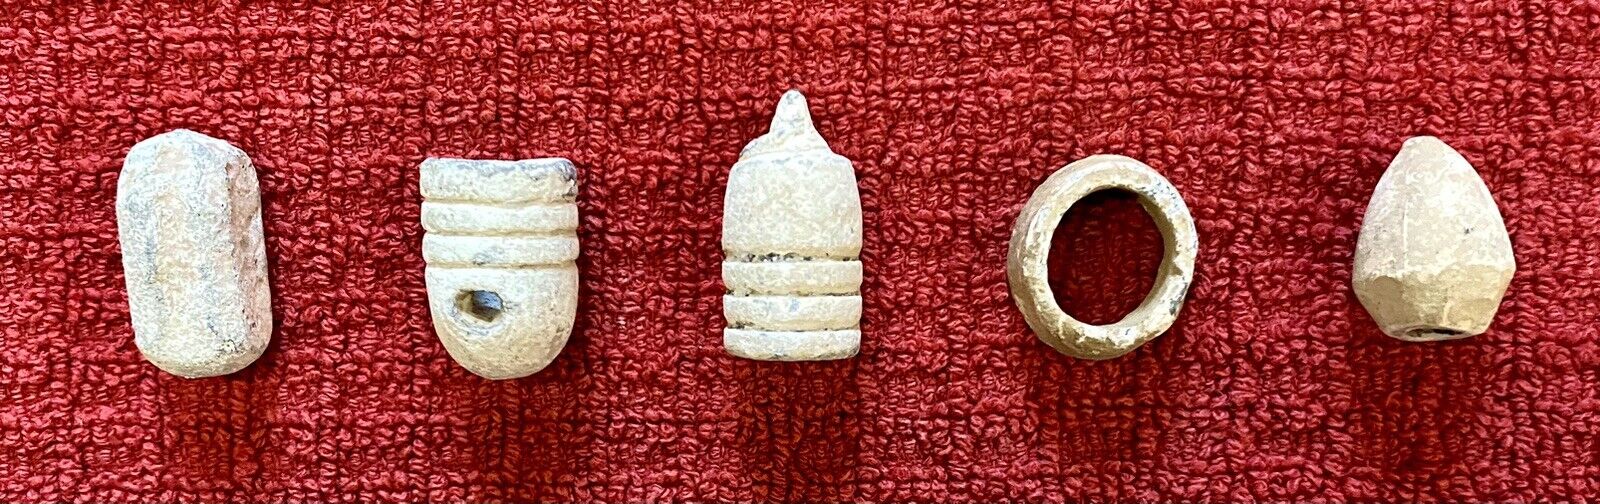 4 Dug Civil War Carved Bullets, Camp Art. One Looks Like A Pipe Bowl.